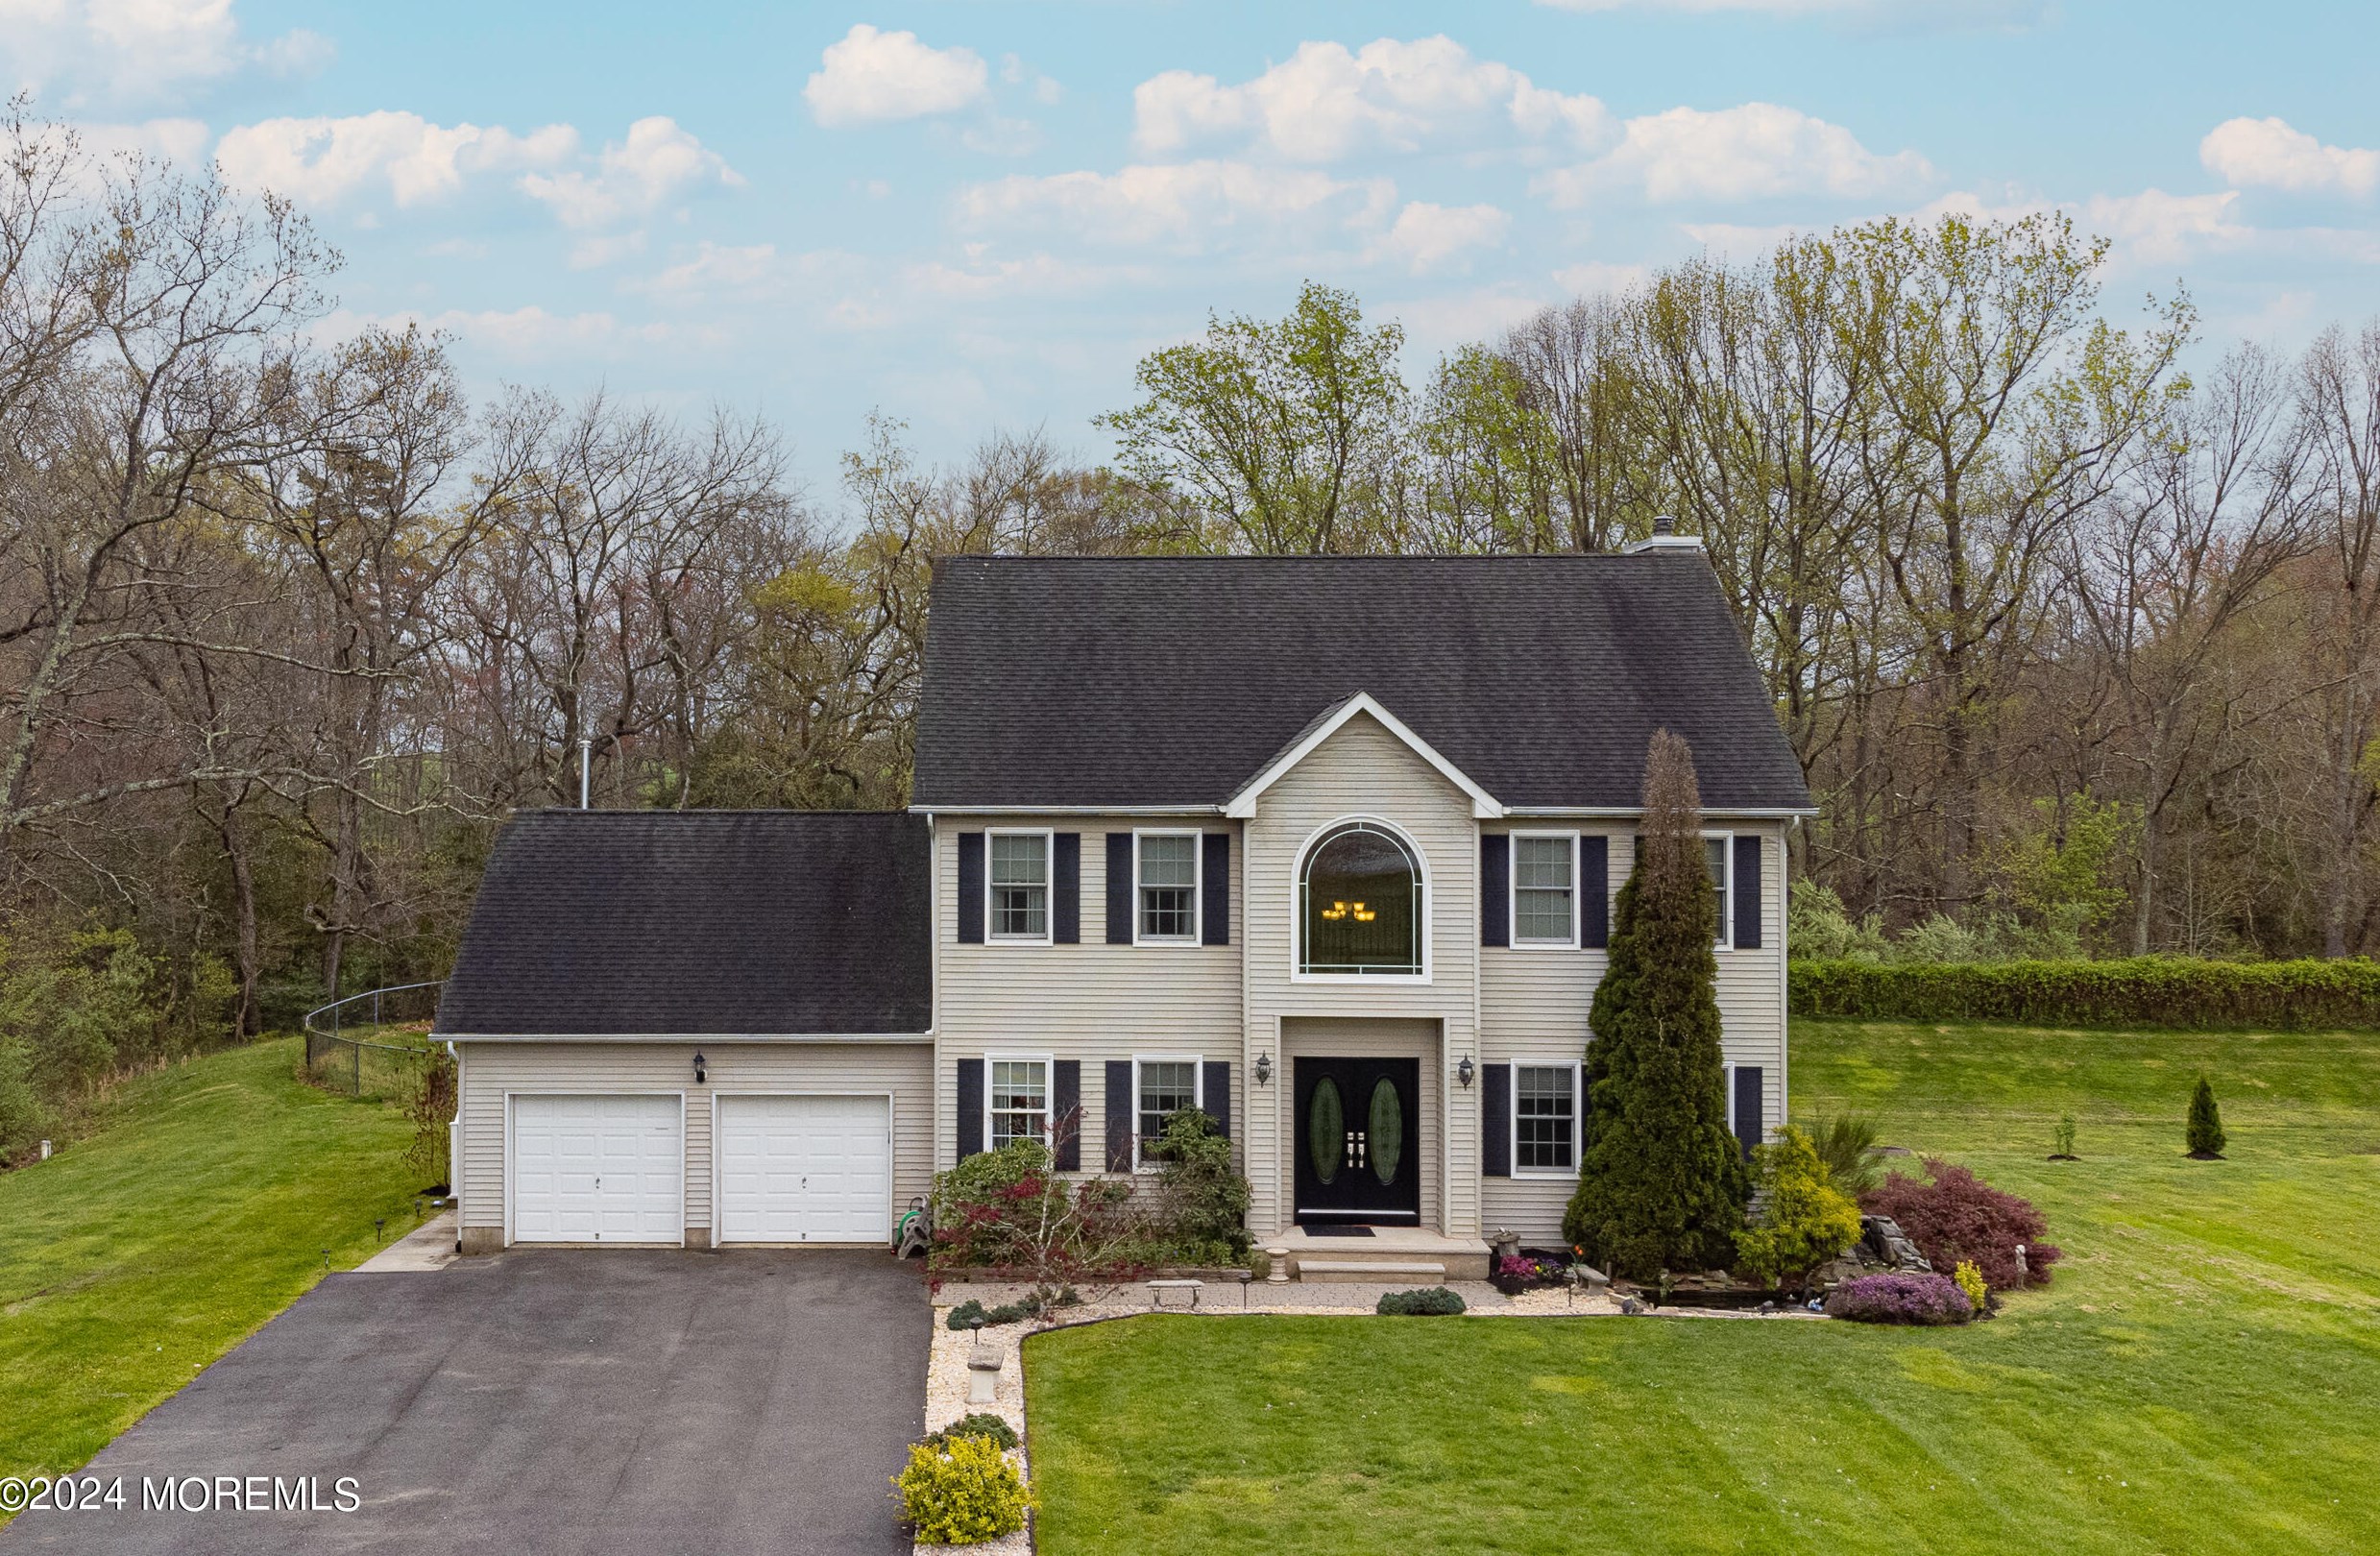 13 Jansen Ct, Plumsted Township, NJ 08533